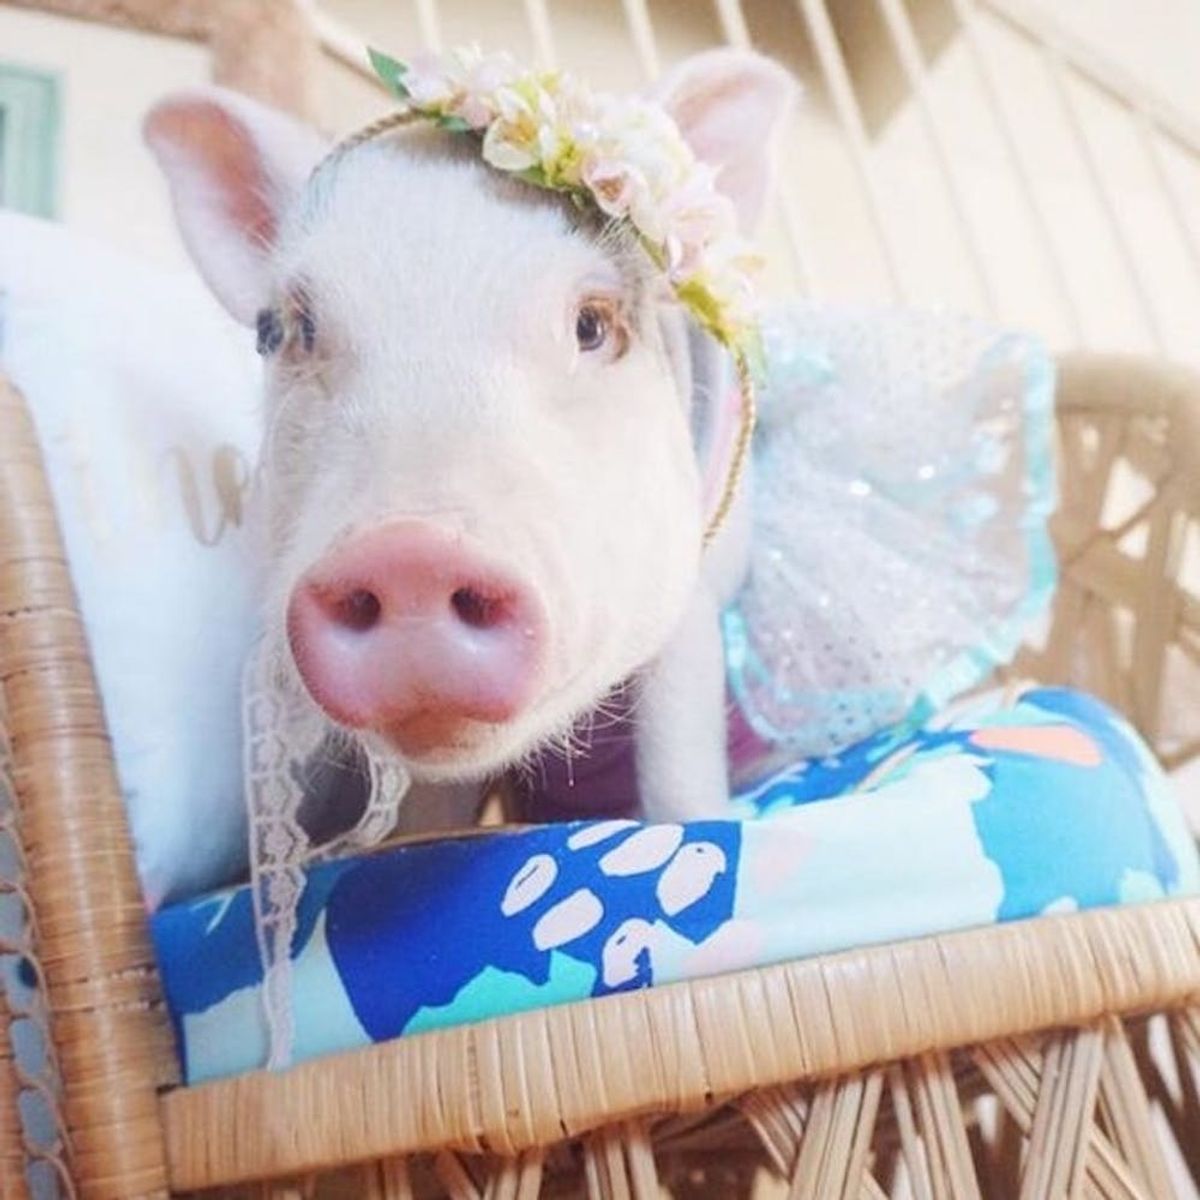 The 15 Cutest Pig-stagram Accounts of 2016